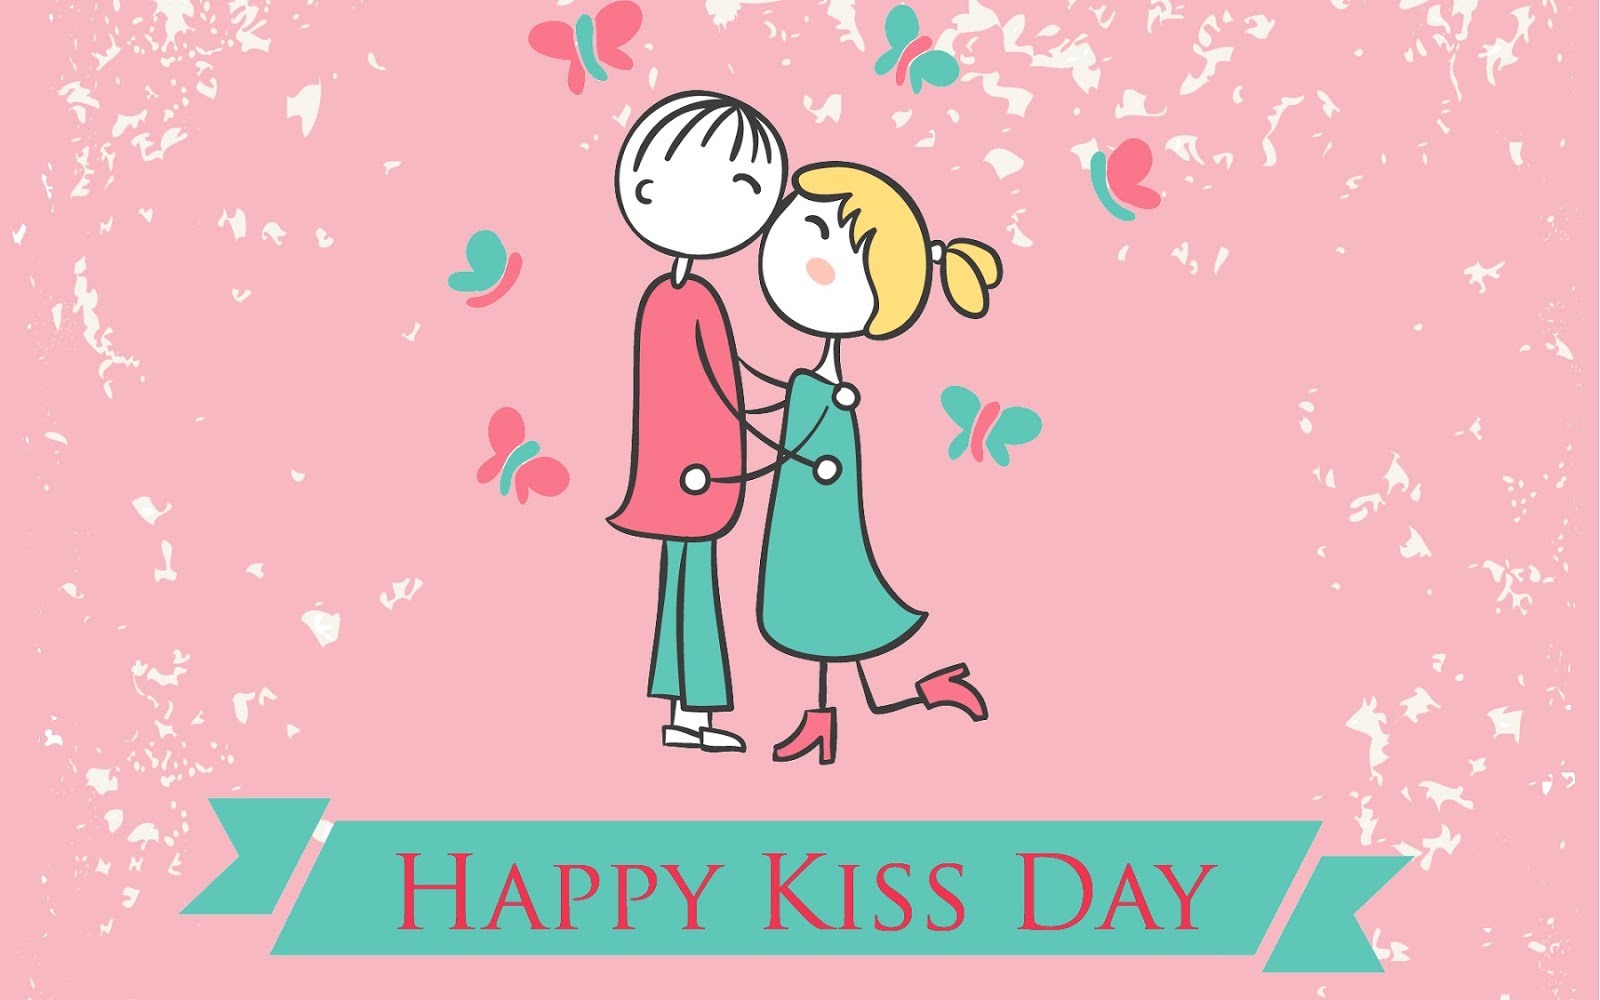 kiss day images hd download